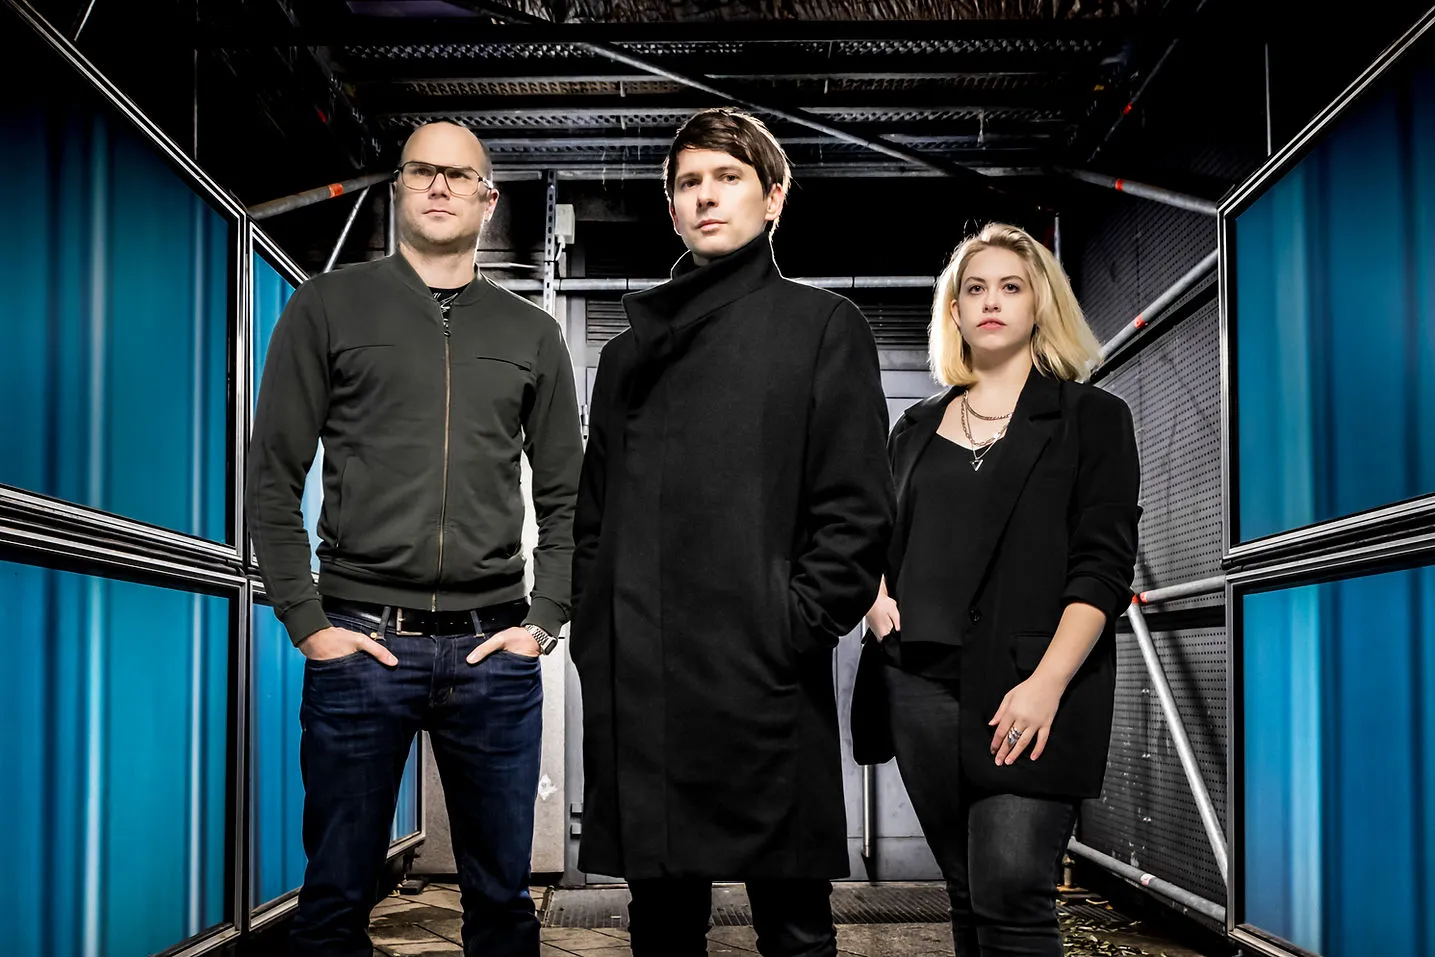 (L–R) Live drummer David Leisser, singer-songwriter Isaac Howlett and live keyboard player Nadine Green of Empathy Test. Not pictured: composer/producer Adam Relf. Photo courtesy of Empathy Test.